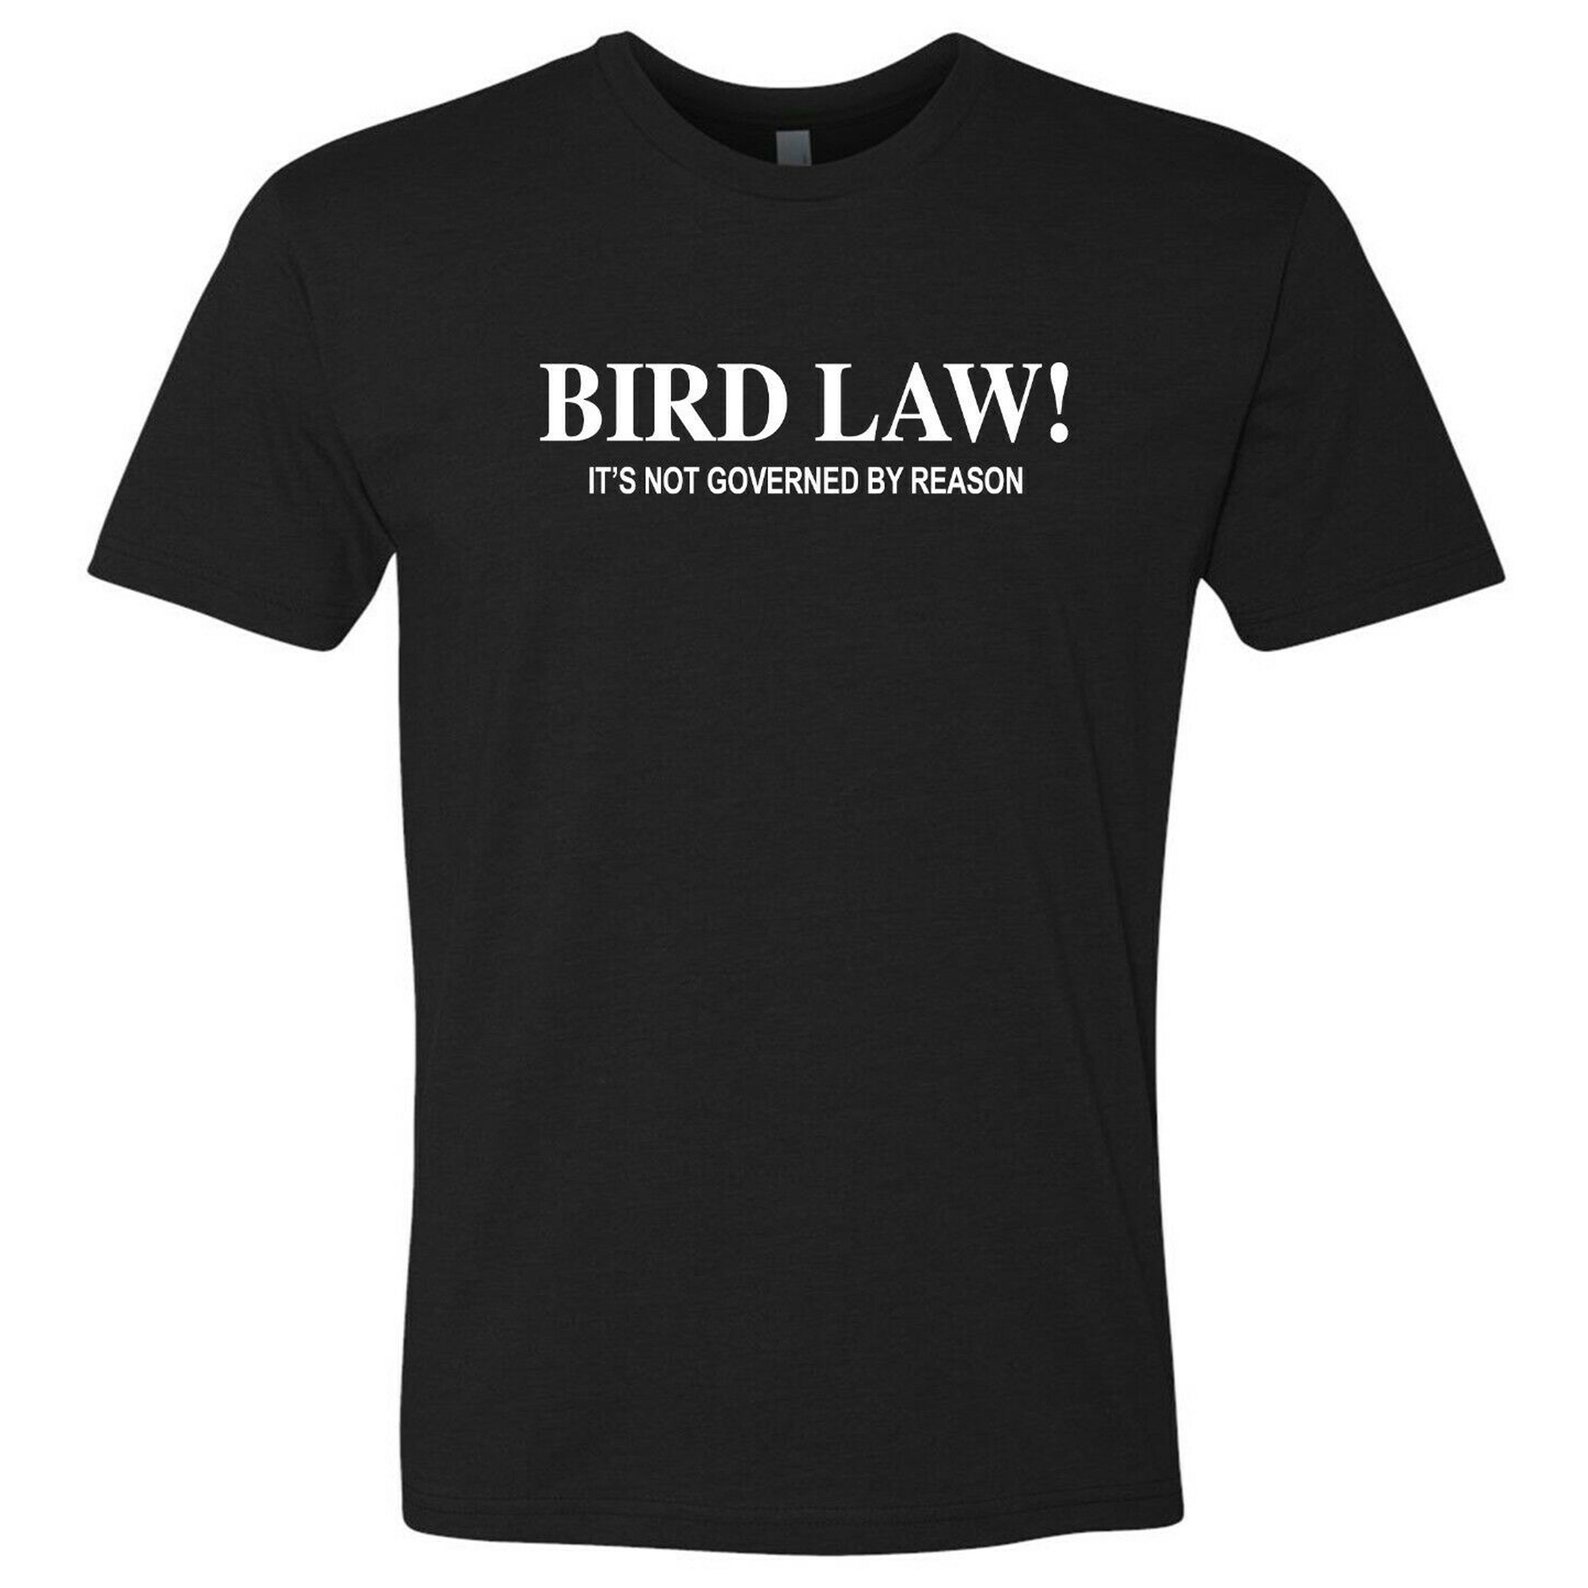 It's Always Sunny Bird Law Graphic T-Shirt Movie Quotes | Etsy